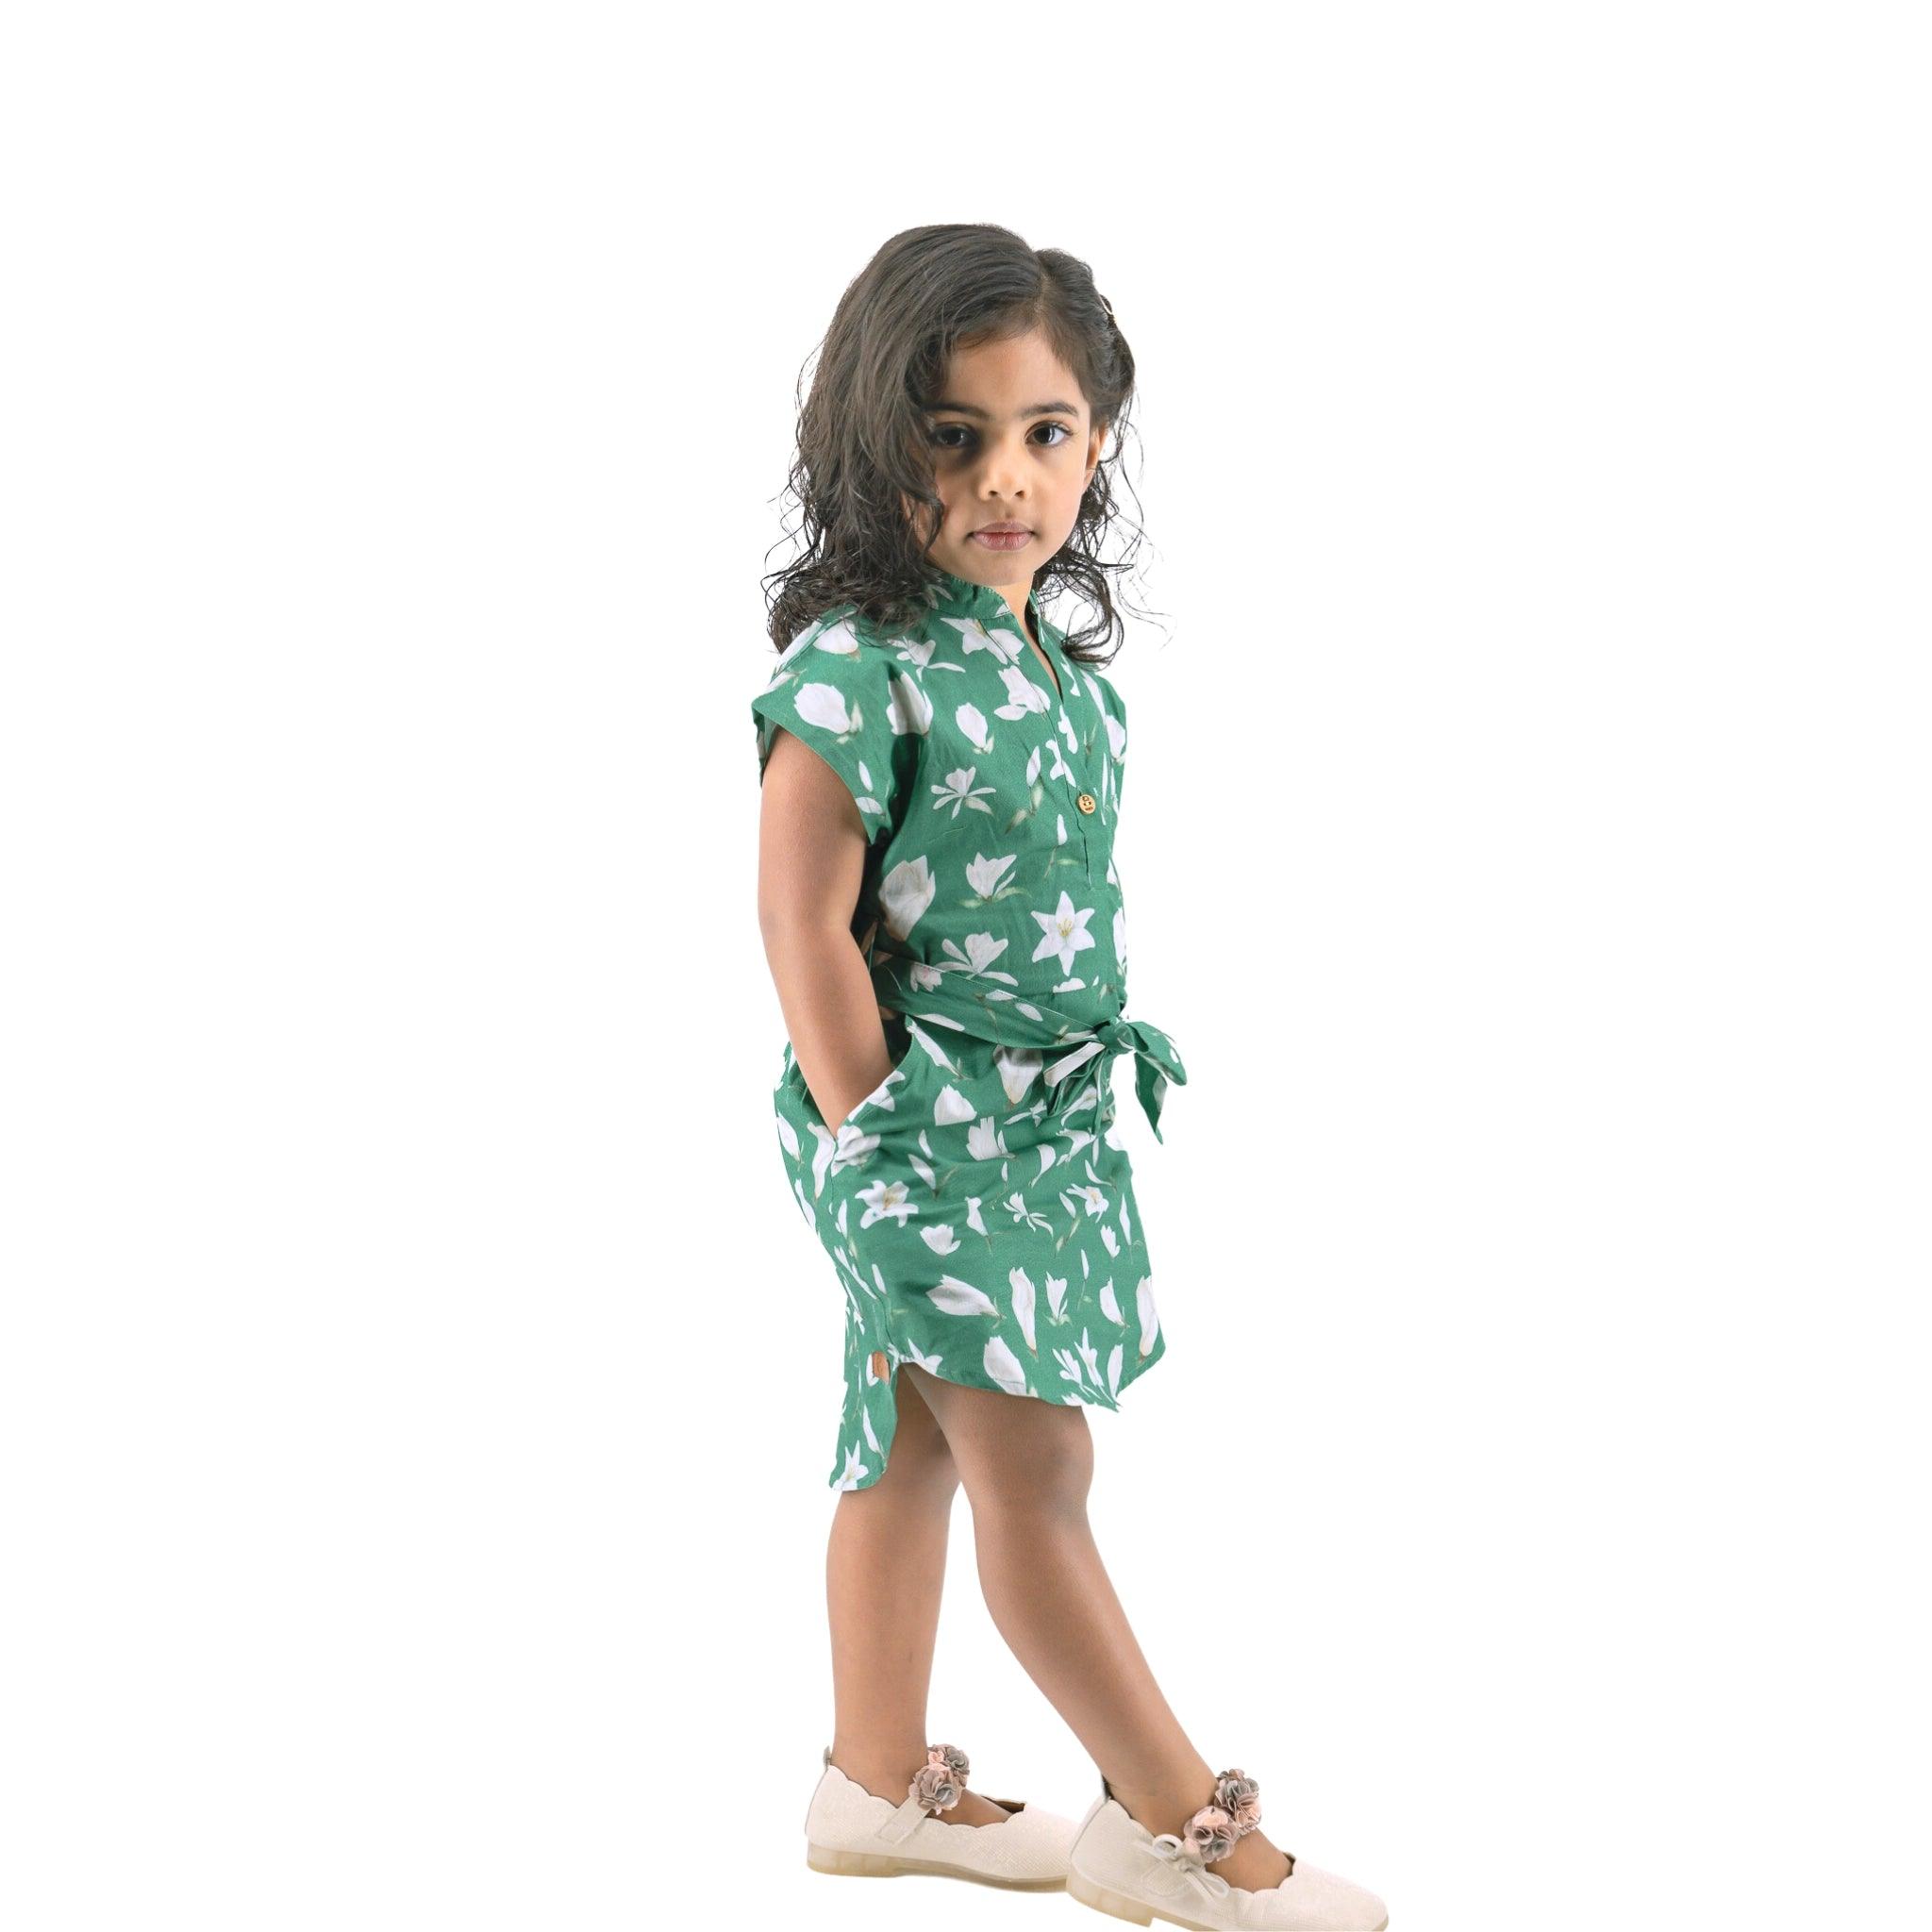 Young girl in a Bottle Green Lilly Blossom Cotton Shirt Dress for Kids by Karee looking back over her shoulder, standing against a white background.